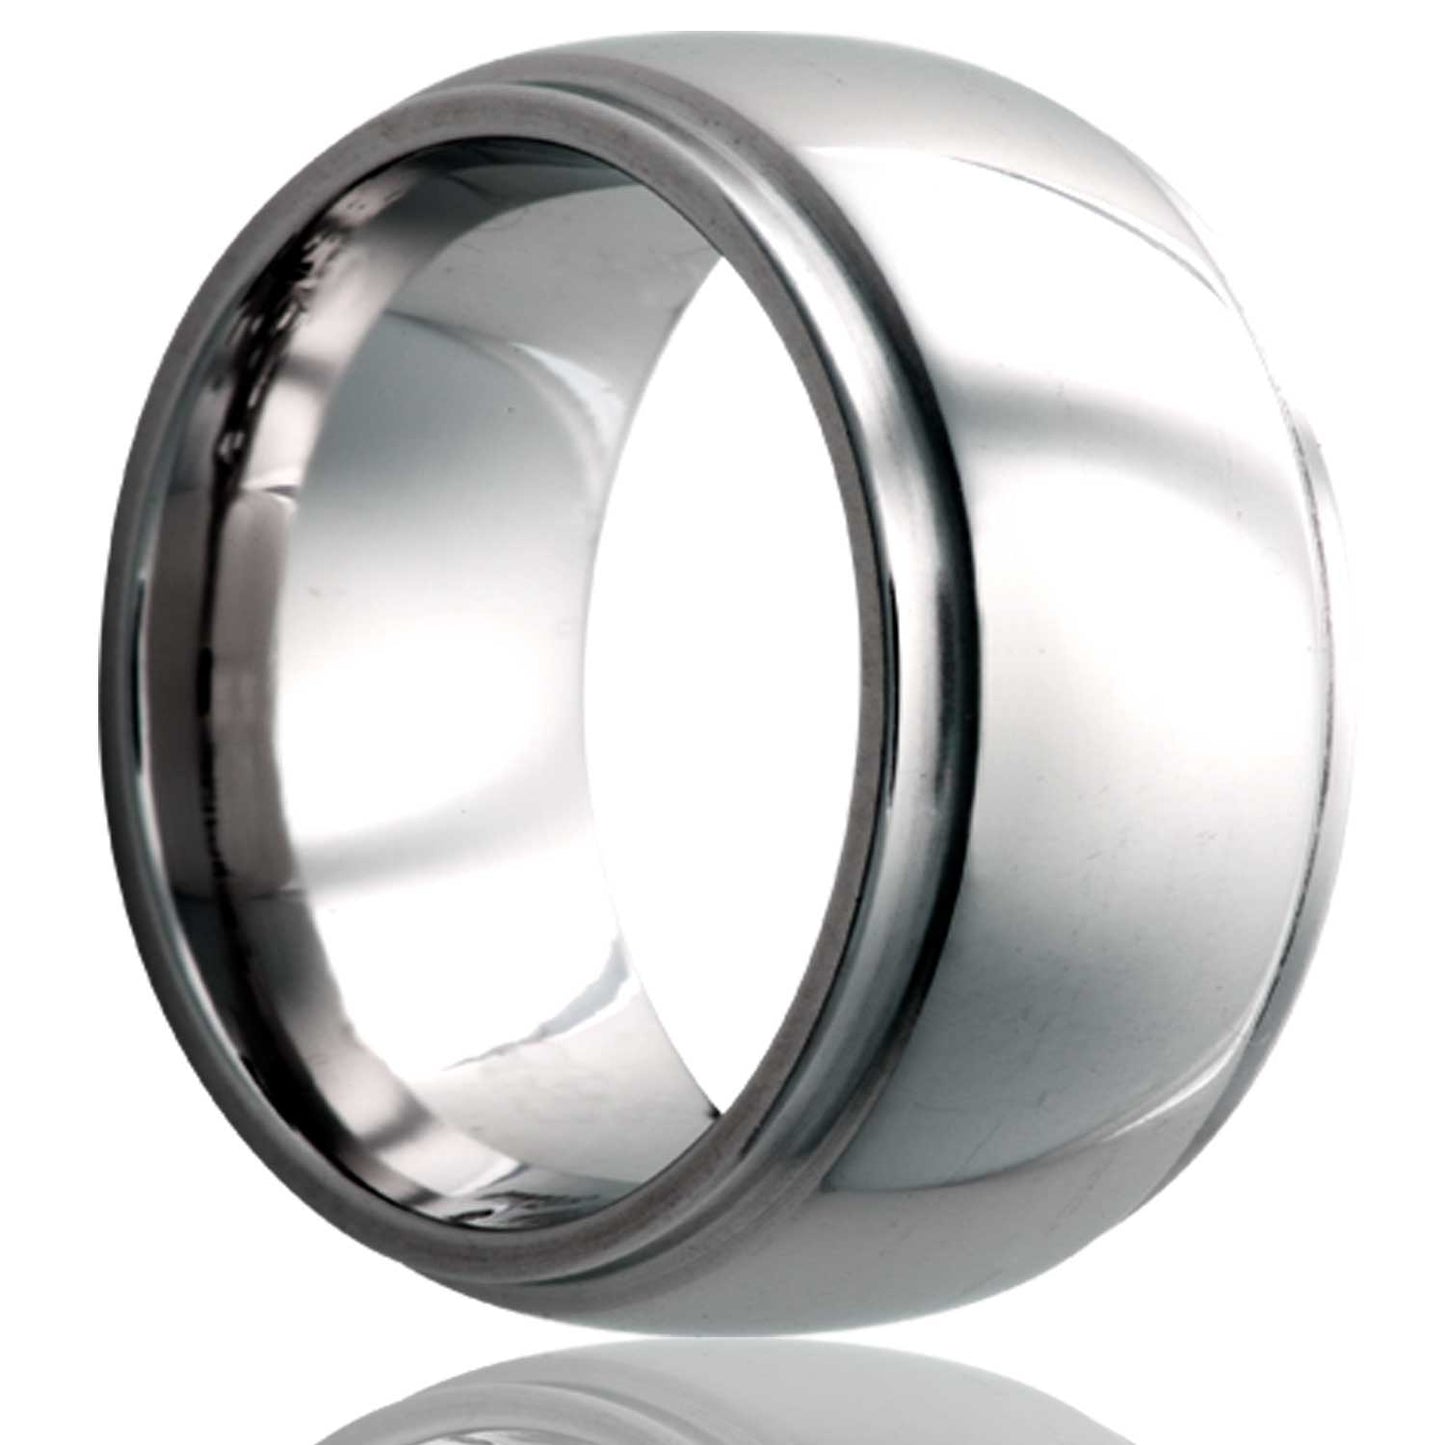 A domed cobalt wedding band with stepped edges displayed on a neutral white background.